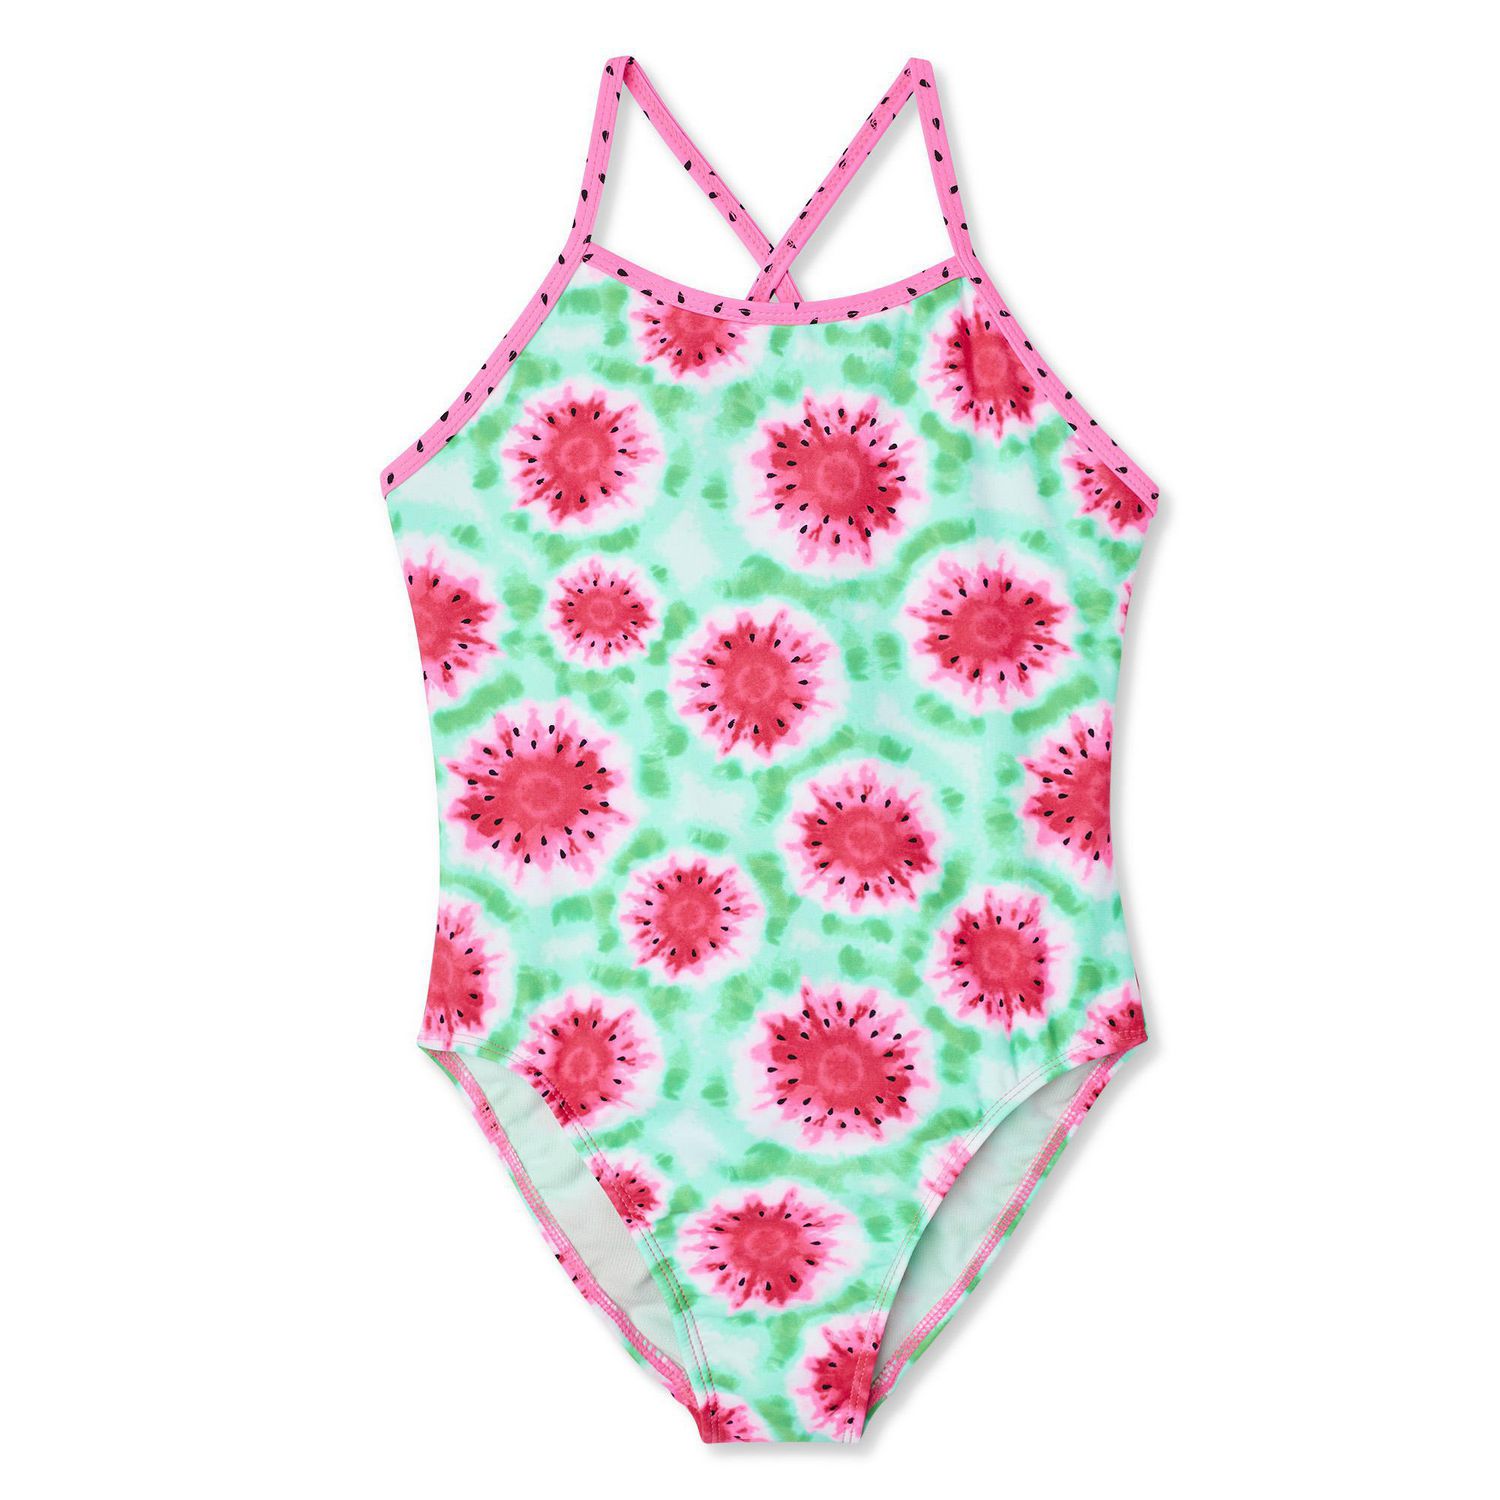 George Girls' All-Over Print Swimsuit | Walmart Canada